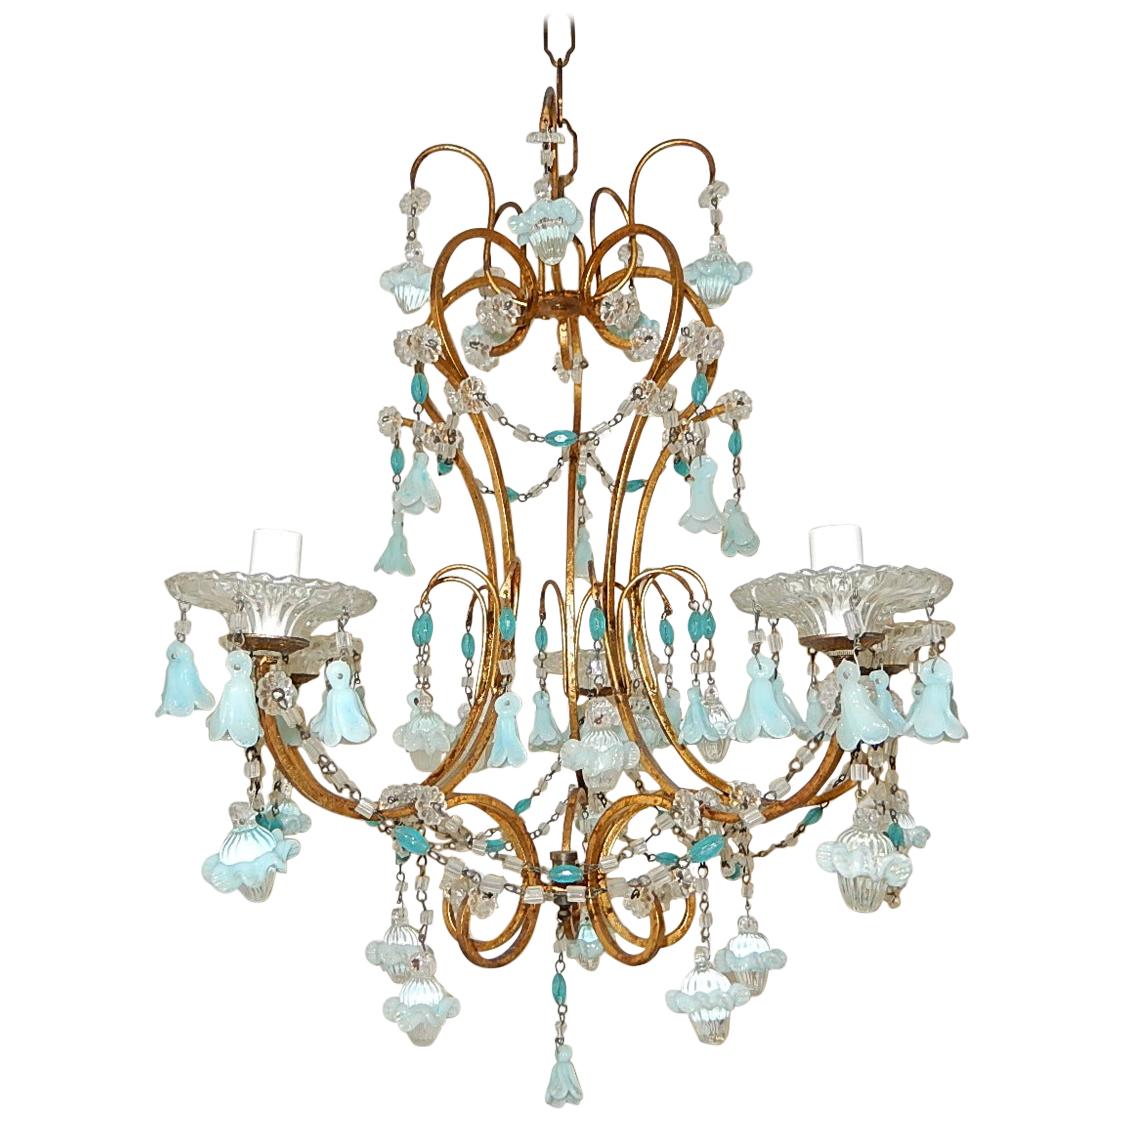 French Aqua Blue Opaline Murano Bell Flowers & Ribbons Chandelier, circa 1900 For Sale